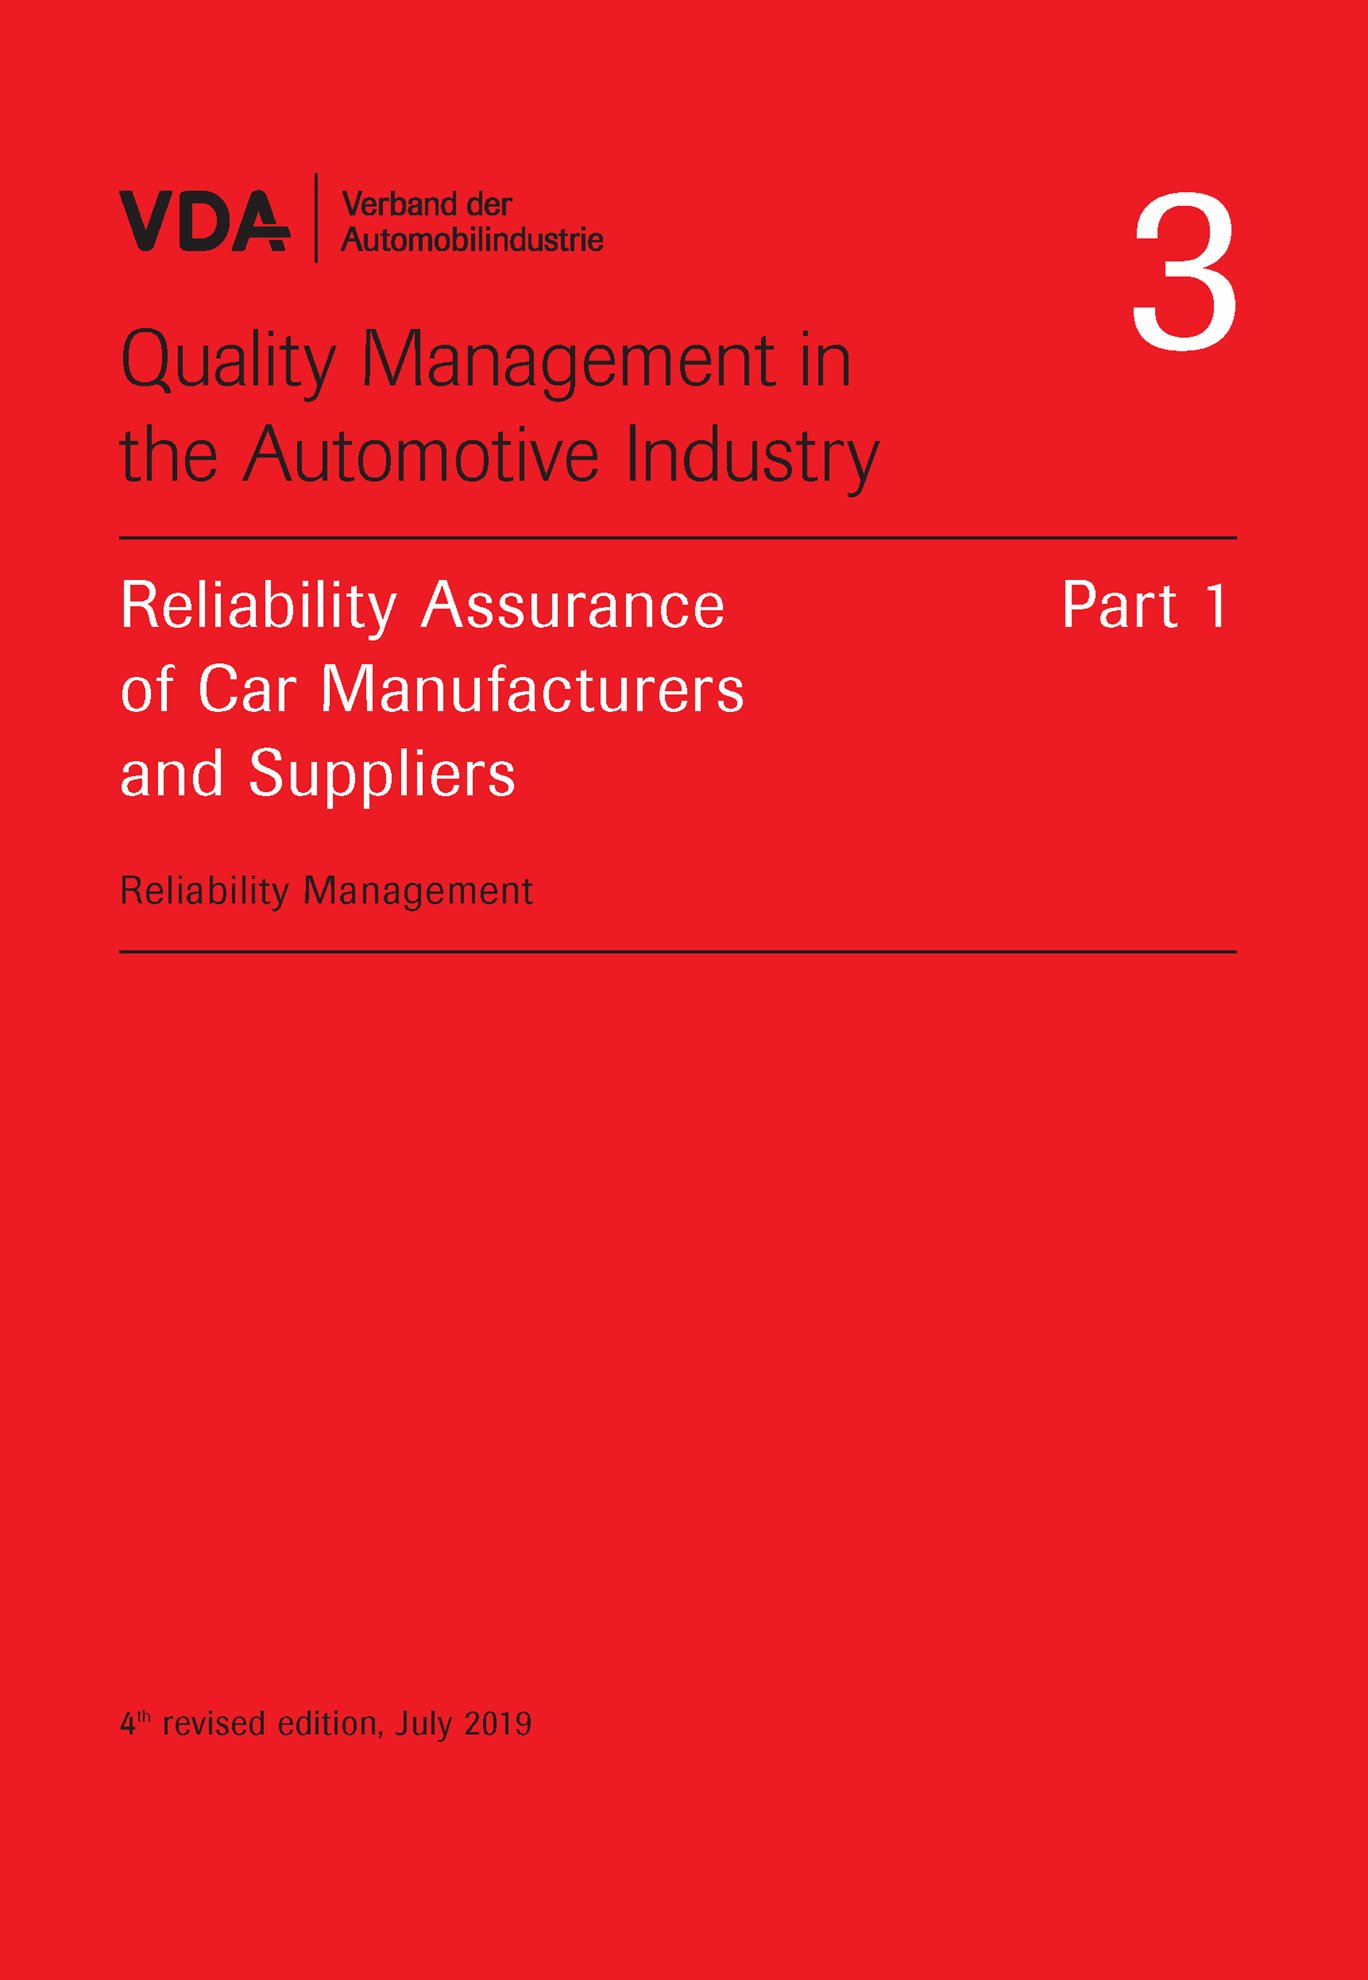 Publikation  VDA Volume 3 Part 1 Reliability Assurance of Car Manufacturers and Suppliers - Reliability Management, 4th revised edition, July 2019 1.7.2019 Ansicht